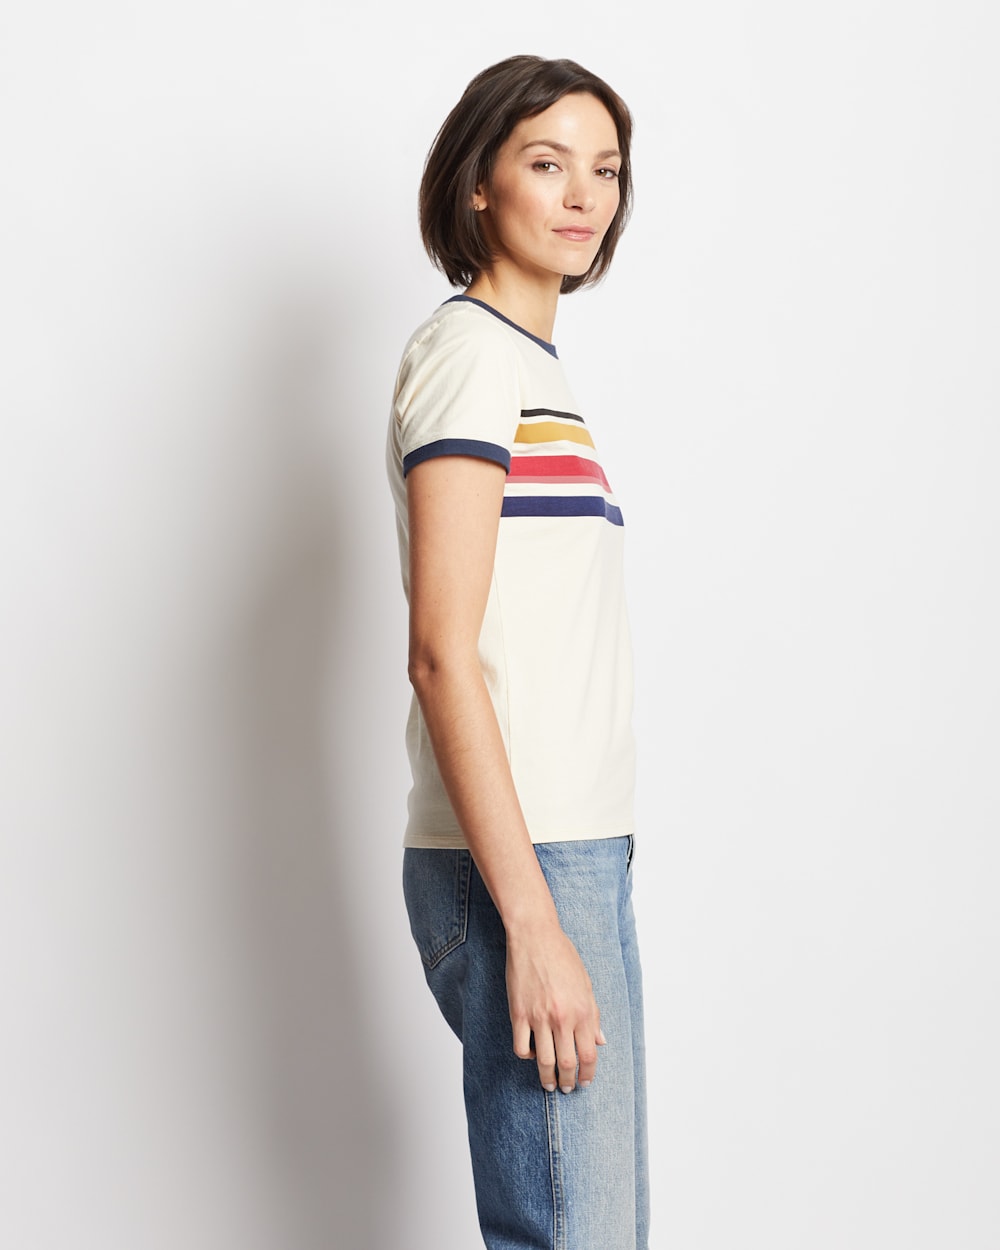 ALTERNATE VIEW OF WOMEN'S DESCHUTES CAMP STRIPE RINGER TEE IN IVORY image number 2